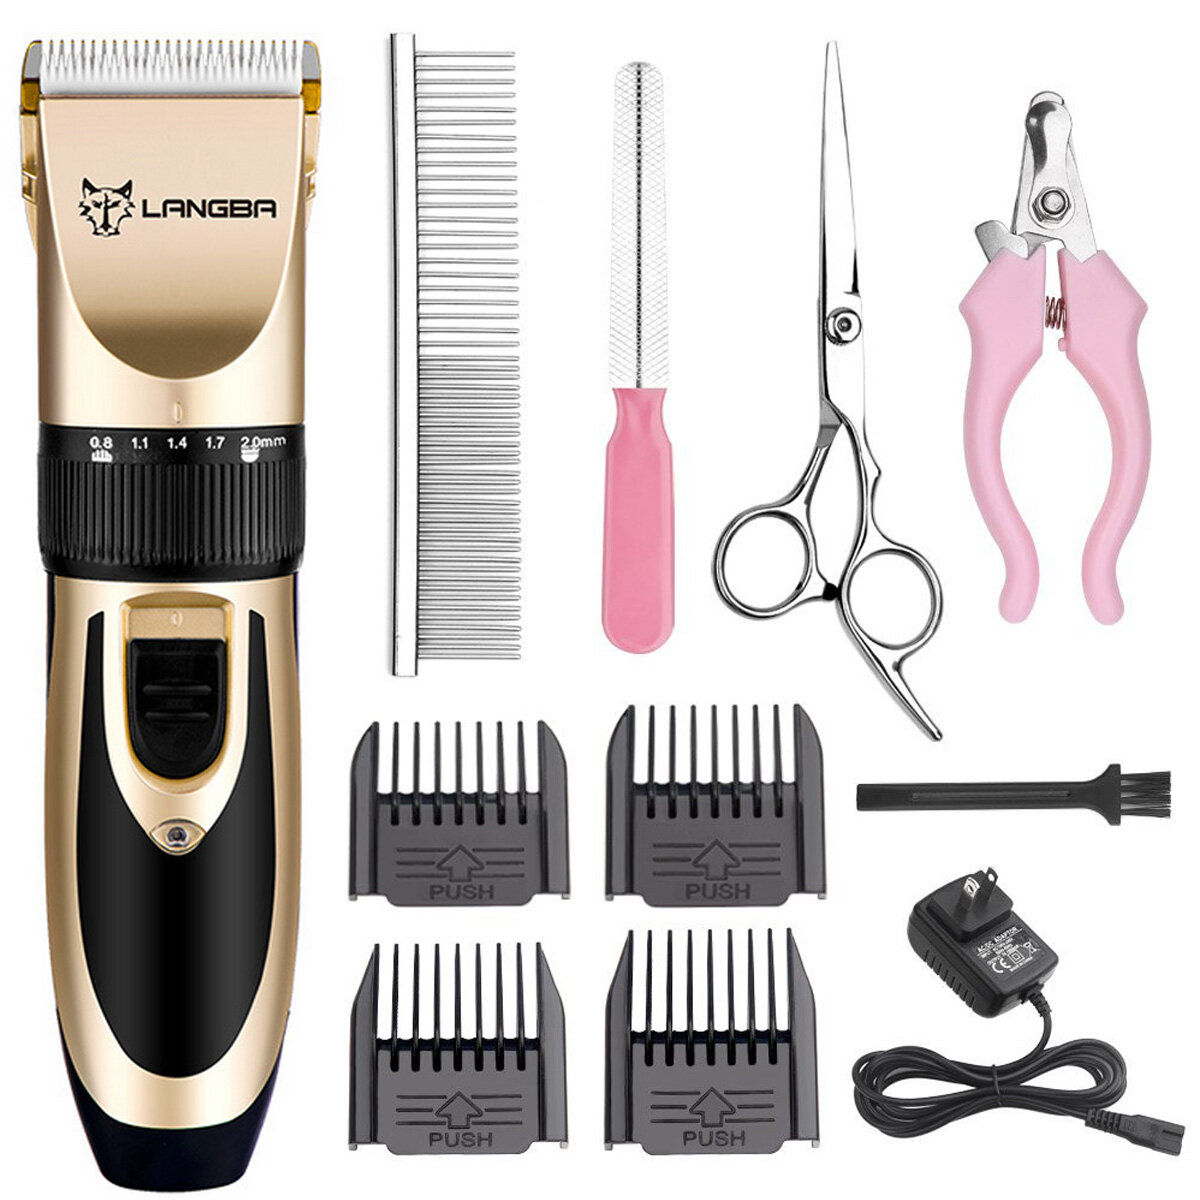 Image of Electric Hair Clippers Scissors&Shears Shaver Trimmer Grooming Cordless Cat Dog Hair Trimmer